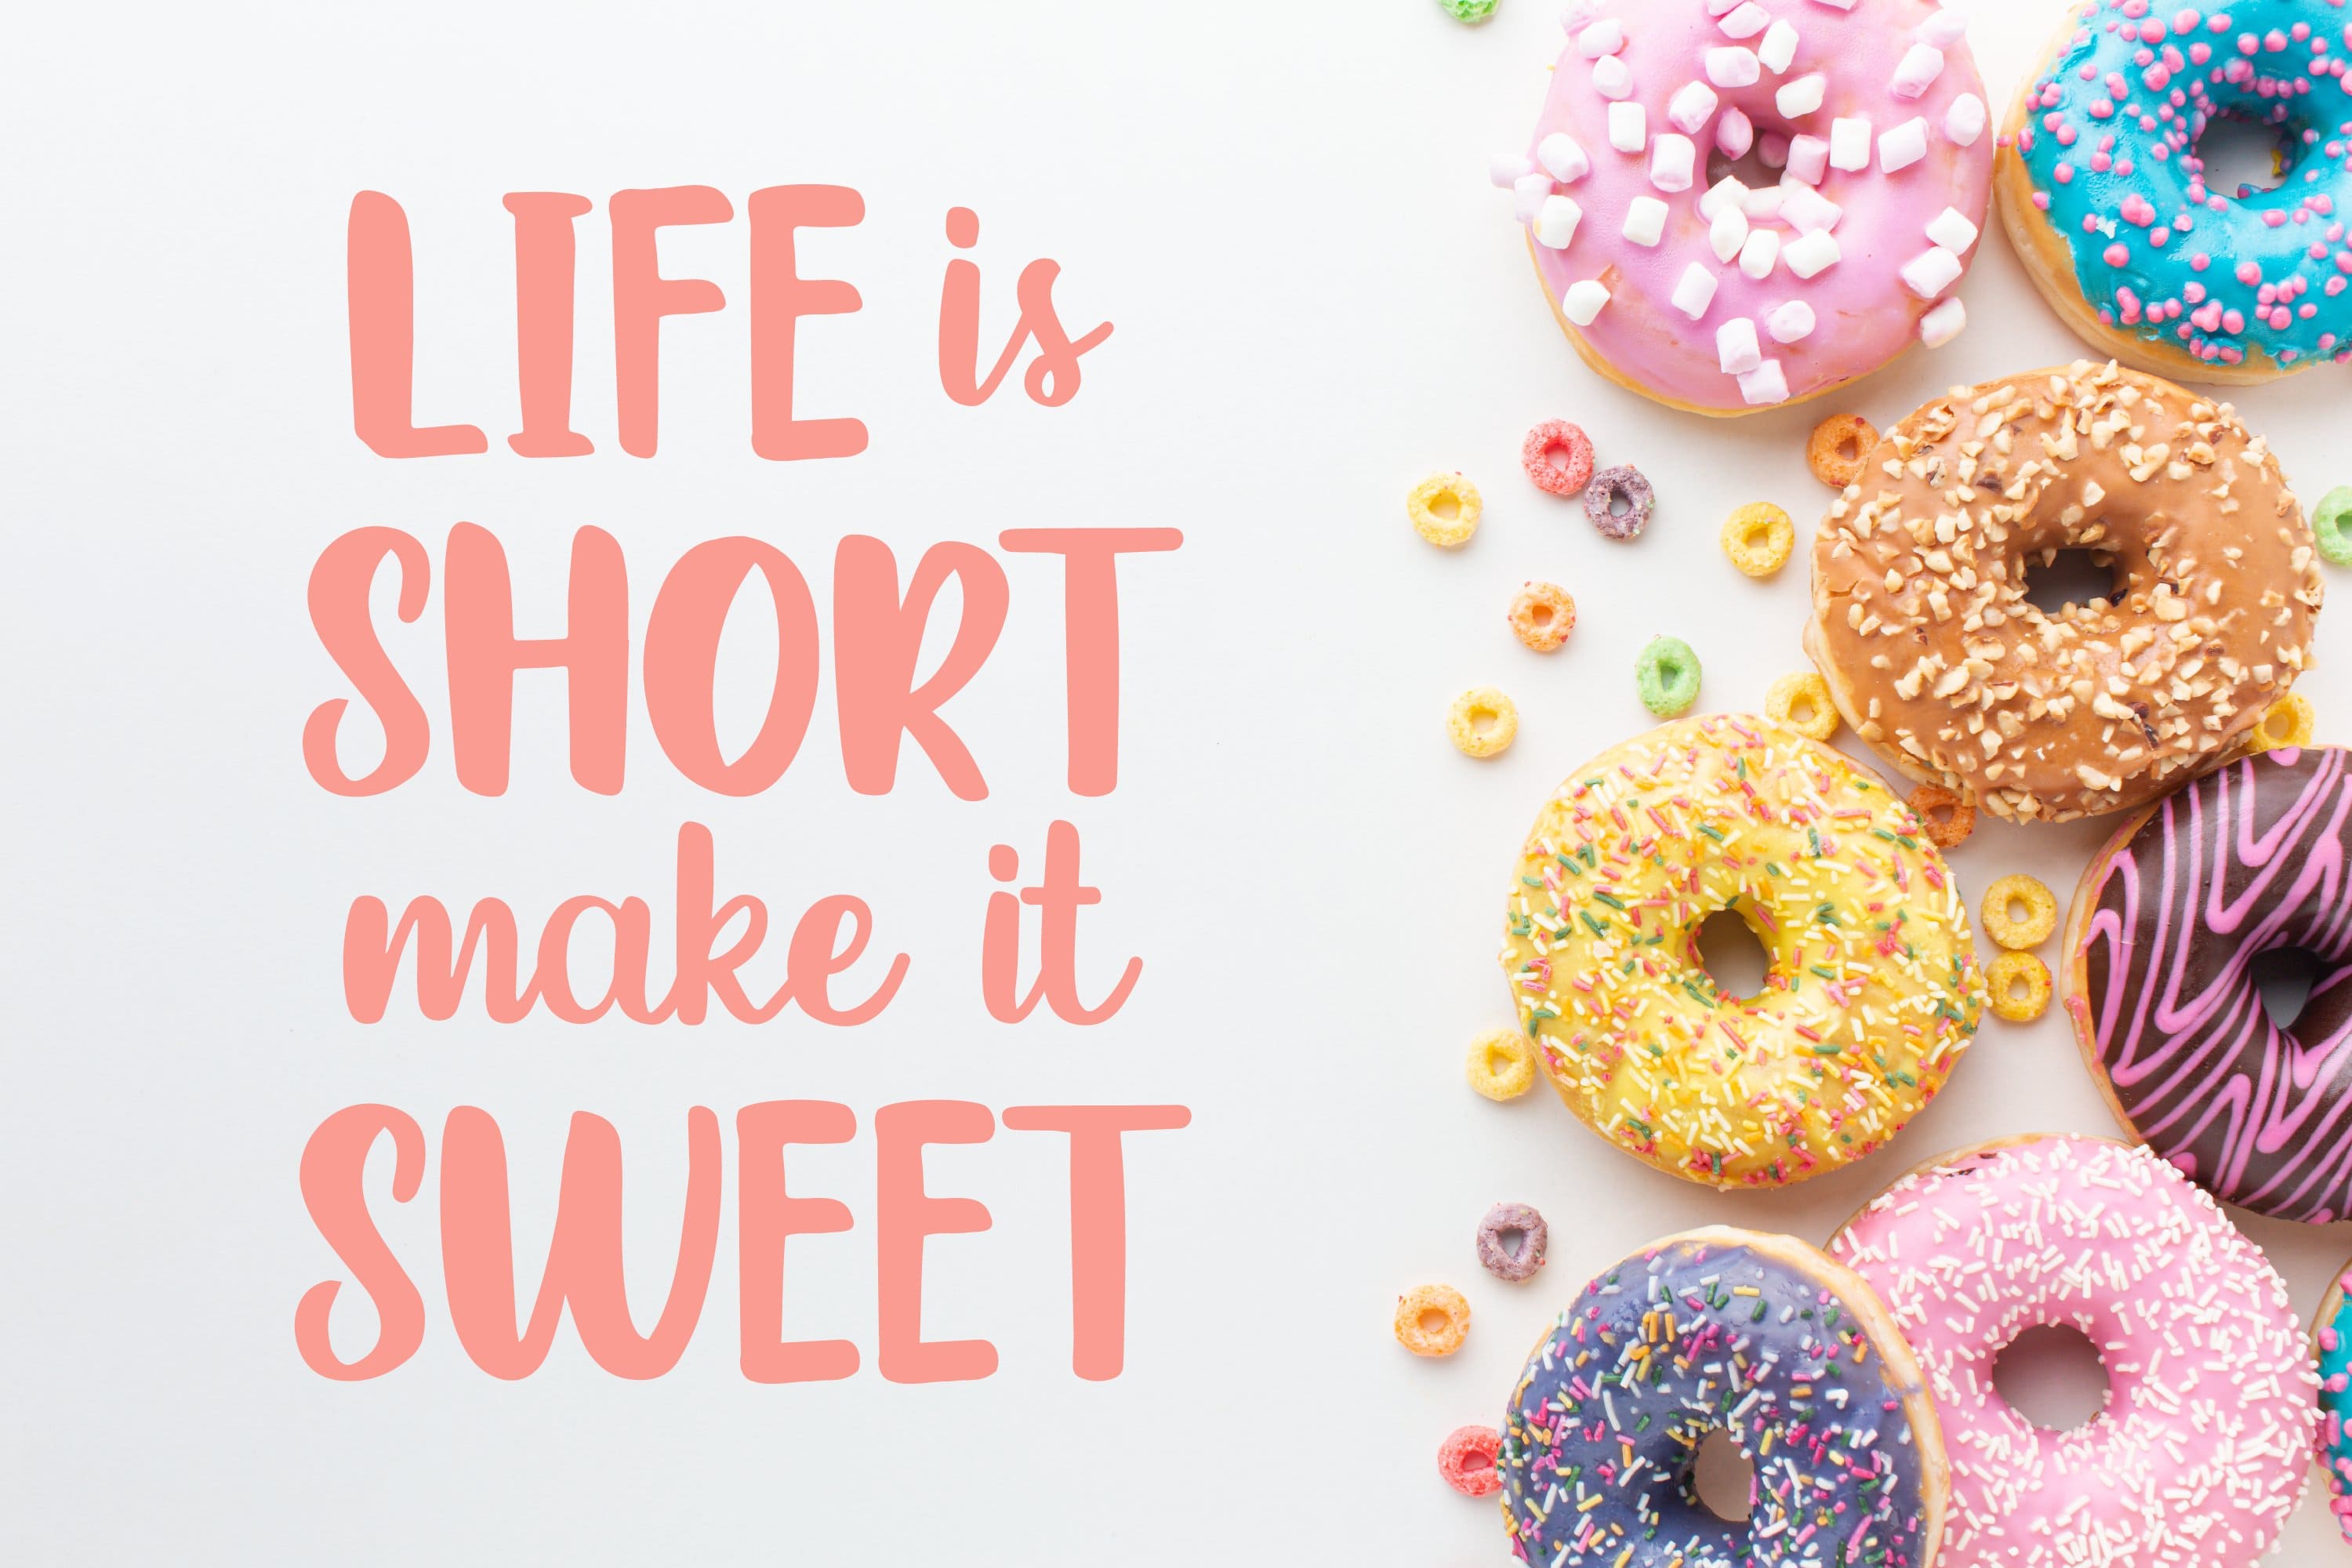 An image of donuts and next to it a pink inscription "Life is short make it sweet".